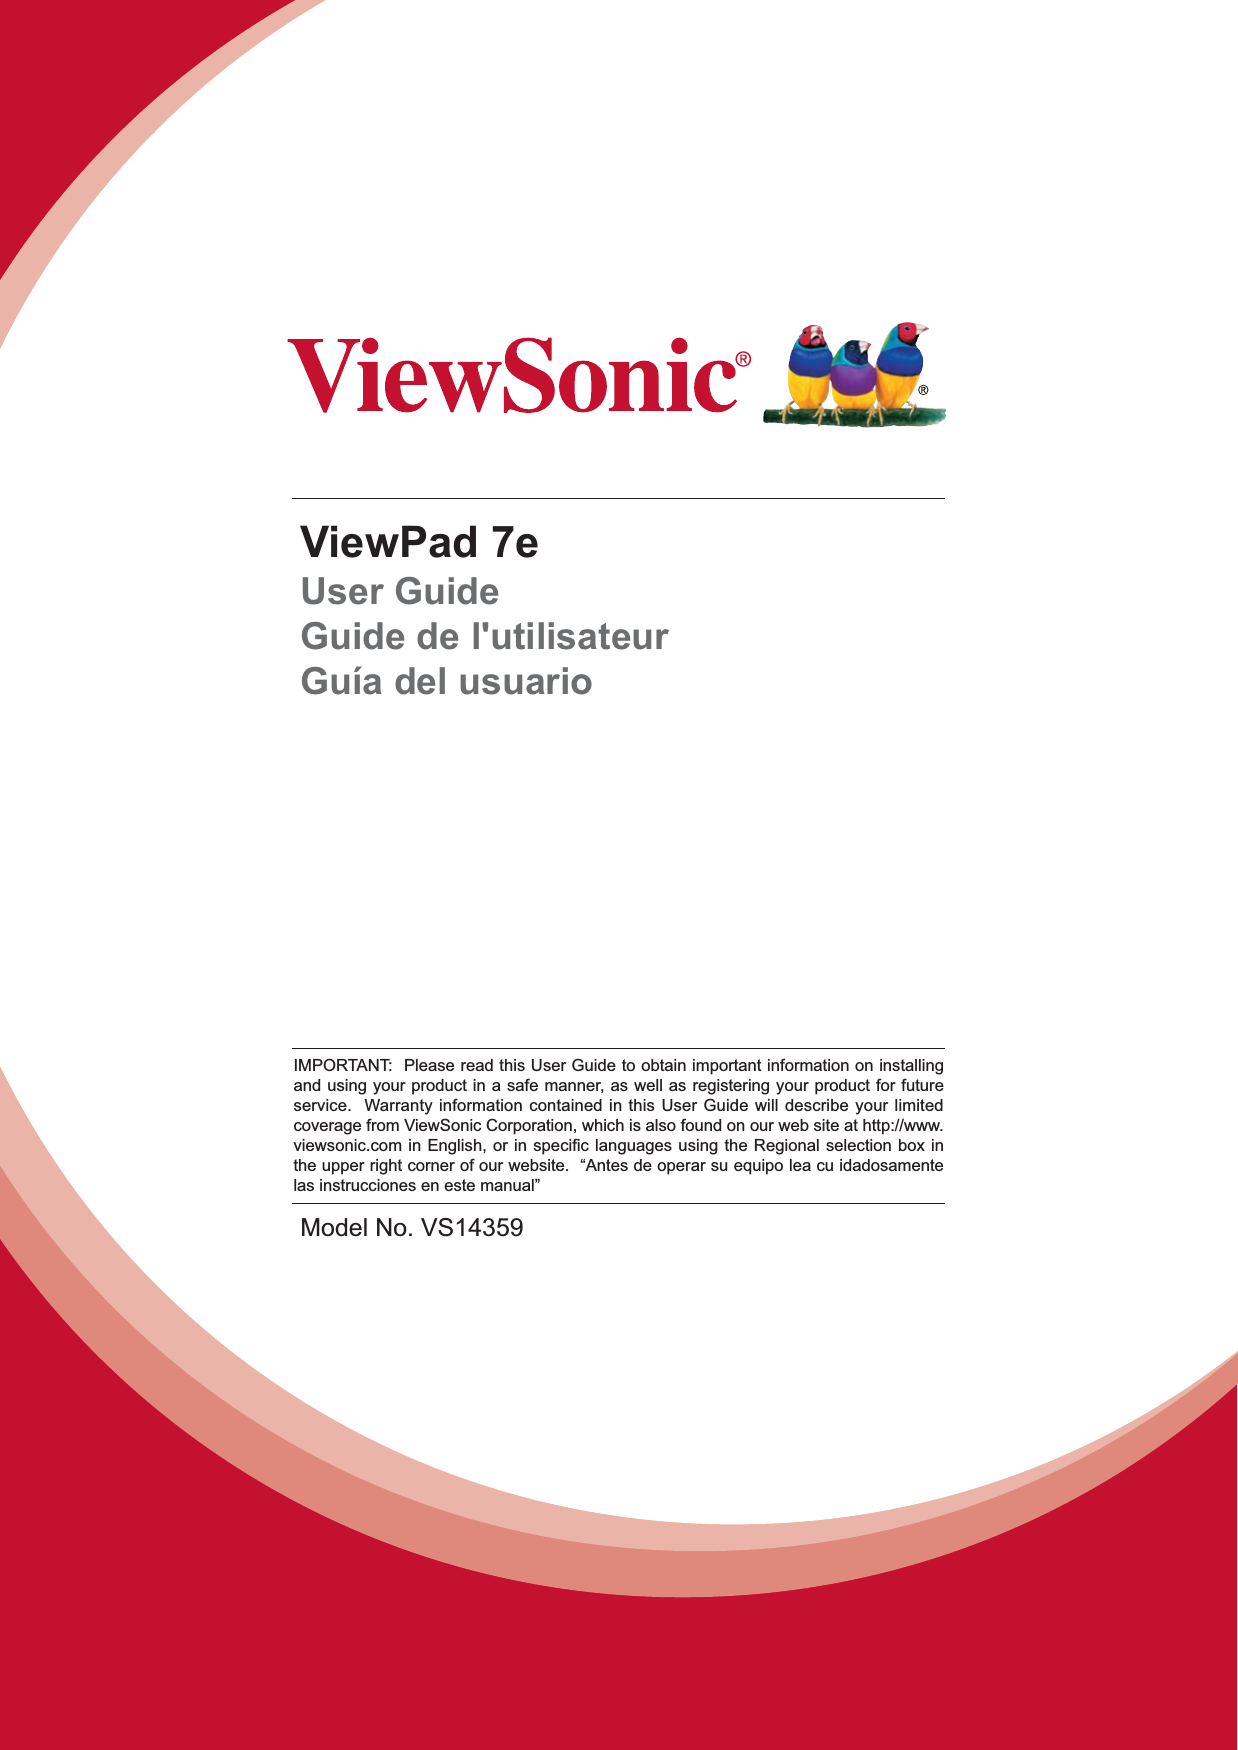 ViewPad 7eUser GuideGuide de l&apos;utilisateurGuía del usuarioIMPORTANT:  Please read this User Guide to obtain important information on installing and using your product in a safe manner, as well as registering your product for future service.  Warranty information contained in this User Guide will describe your limited coverage from ViewSonic Corporation, which is also found on our web site at http://www.YLHZVRQLFFRPLQ(QJOLVKRULQVSHFL¿FODQJXDJHVXVLQJWKH5HJLRQDOVHOHFWLRQER[LQthe upper right corner of our website.  “Antes de operar su equipo lea cu idadosamente las instrucciones en este manual”Model No. VS14359